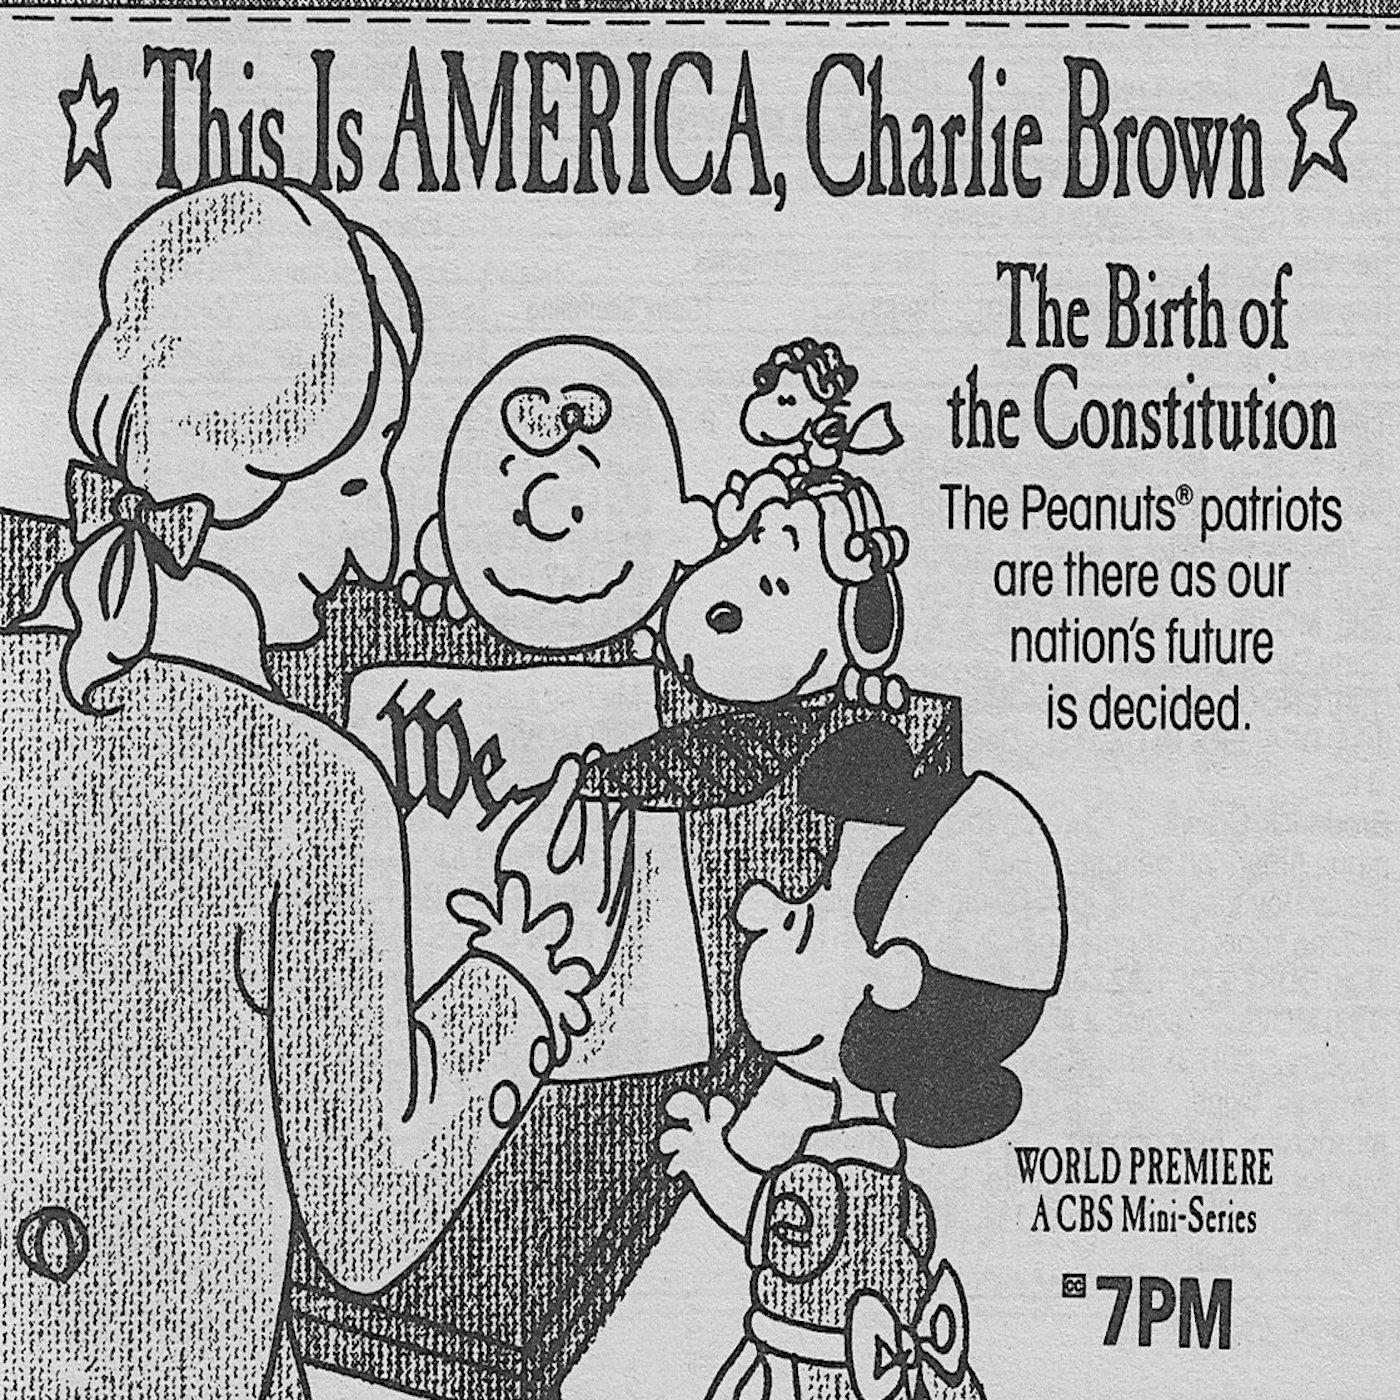 Thumbnail for "Charlie Brown's America".